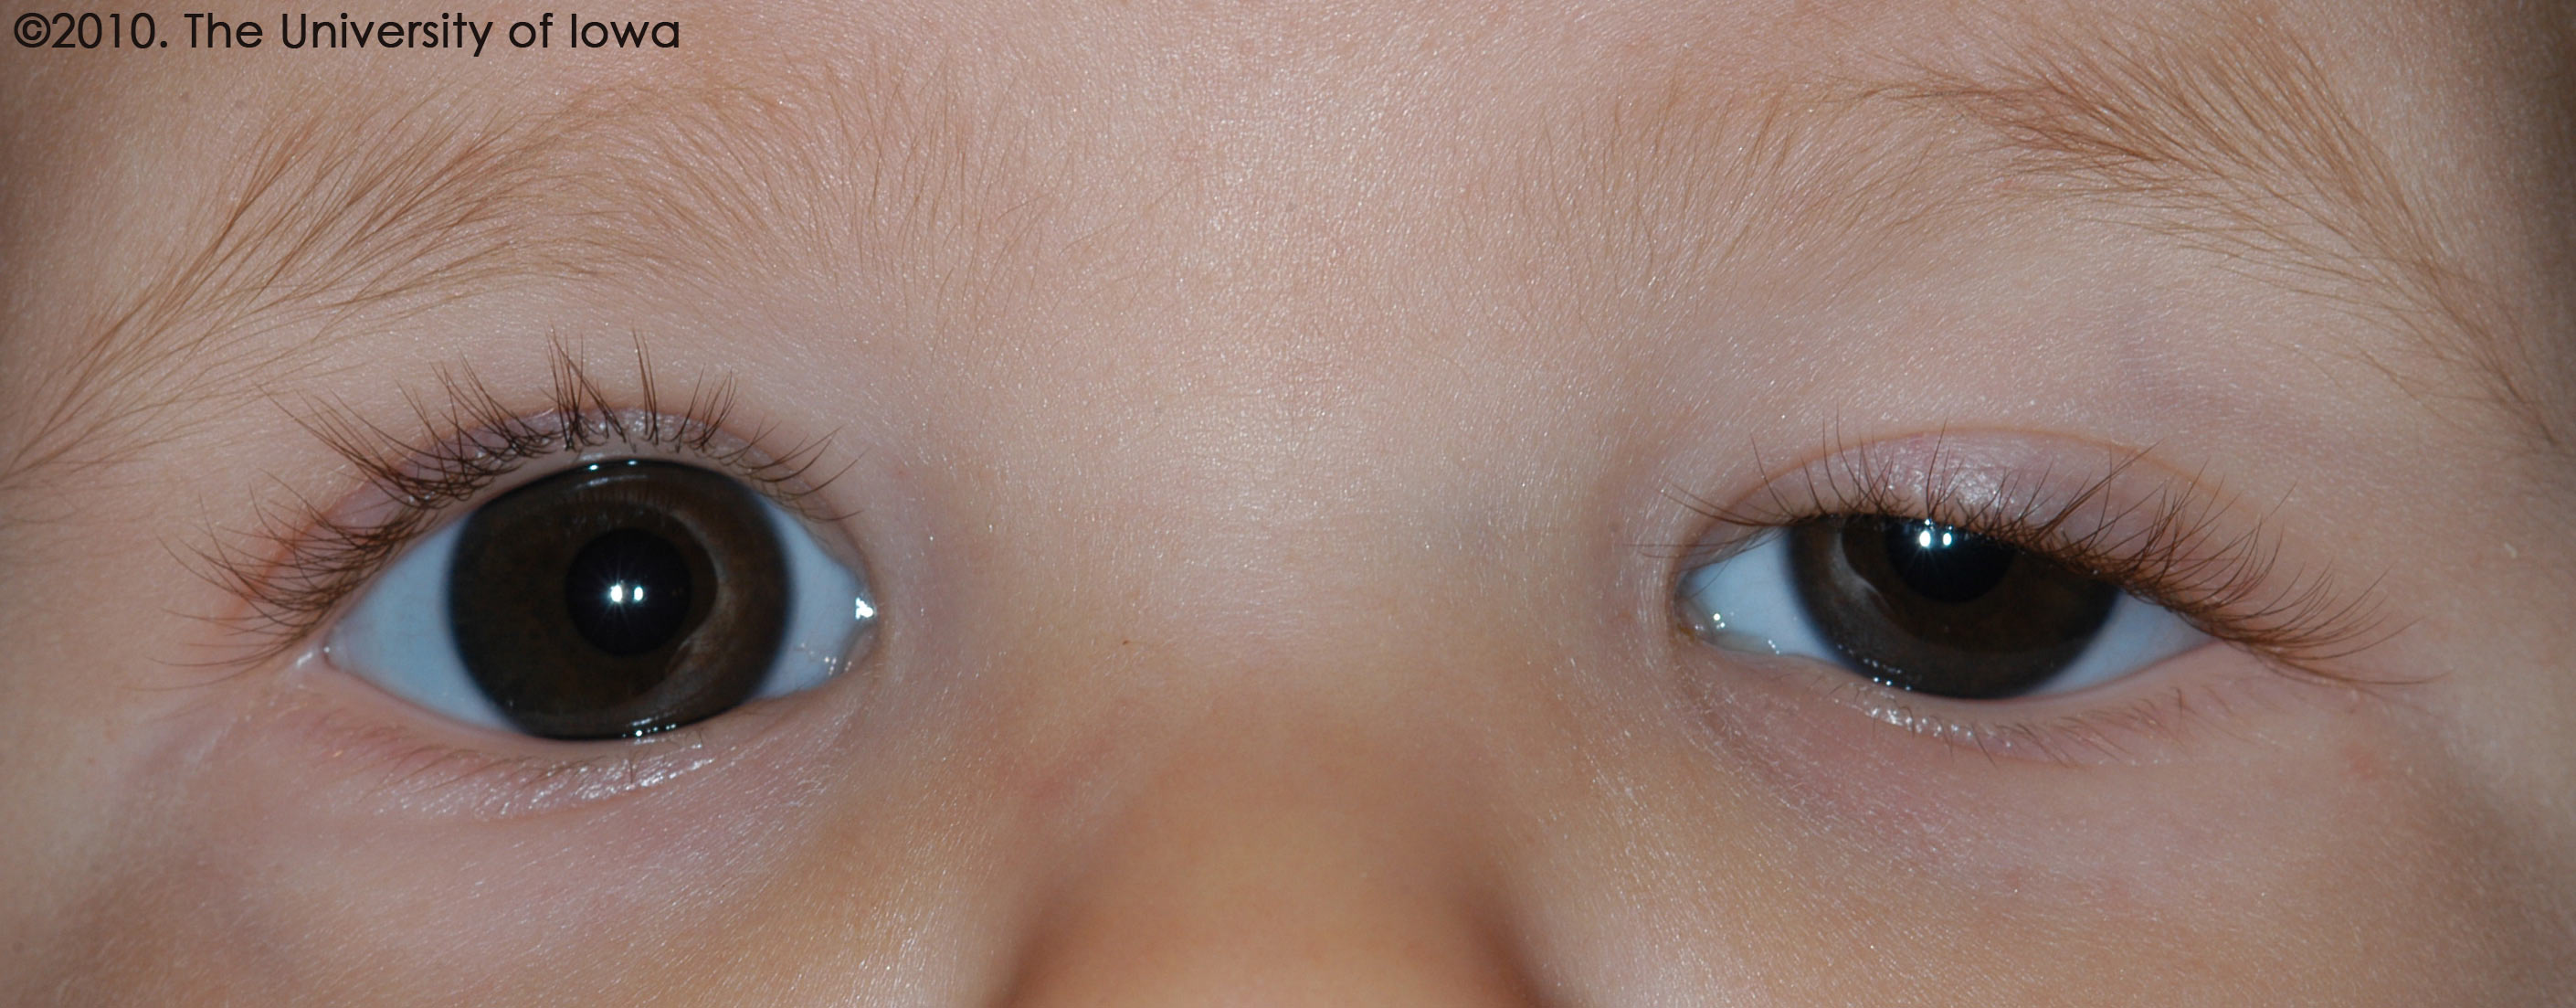   ptosis of the left upper eyelid